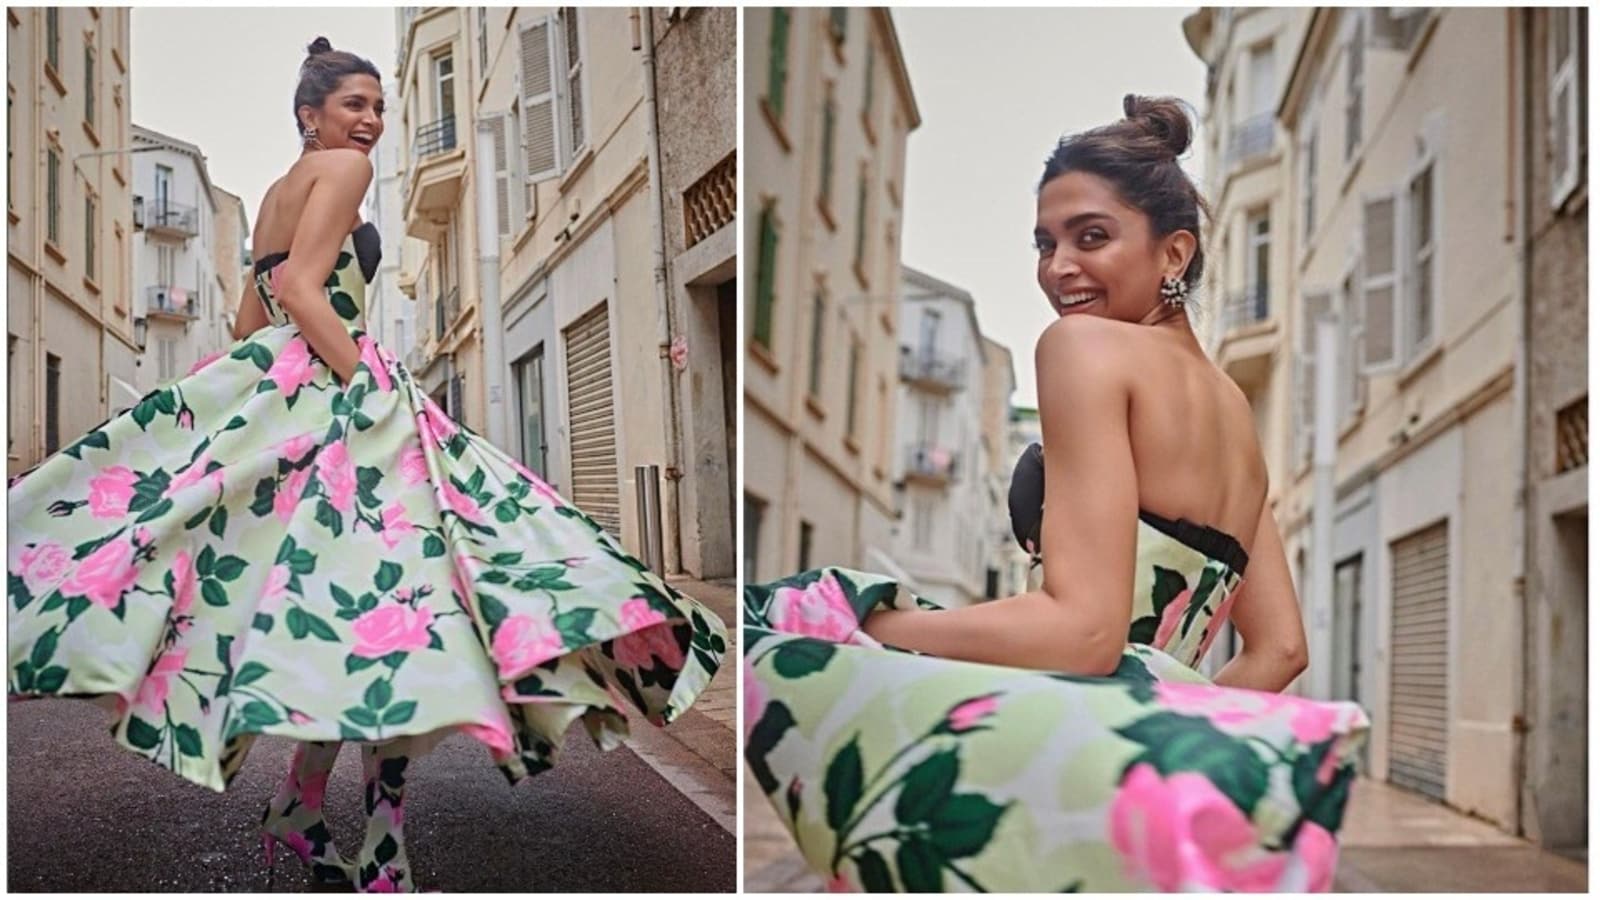 Deepika Padukone brings summer to the streets of Cannes with her latest look. See pics